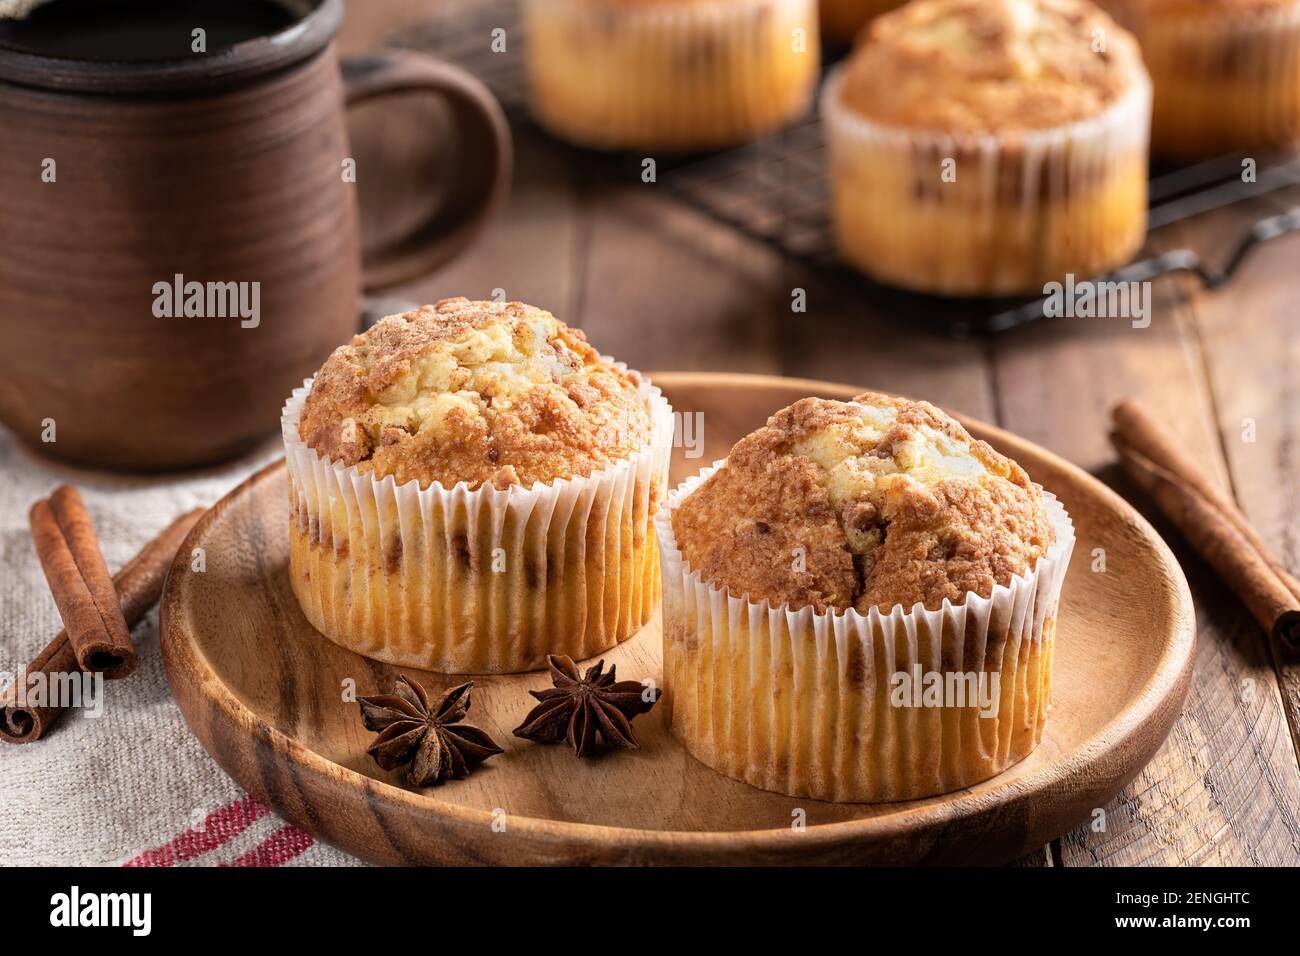 Two cinnamon muffins on a wooden plate with cup of coffee and muffins on a rack in background Stock Photo